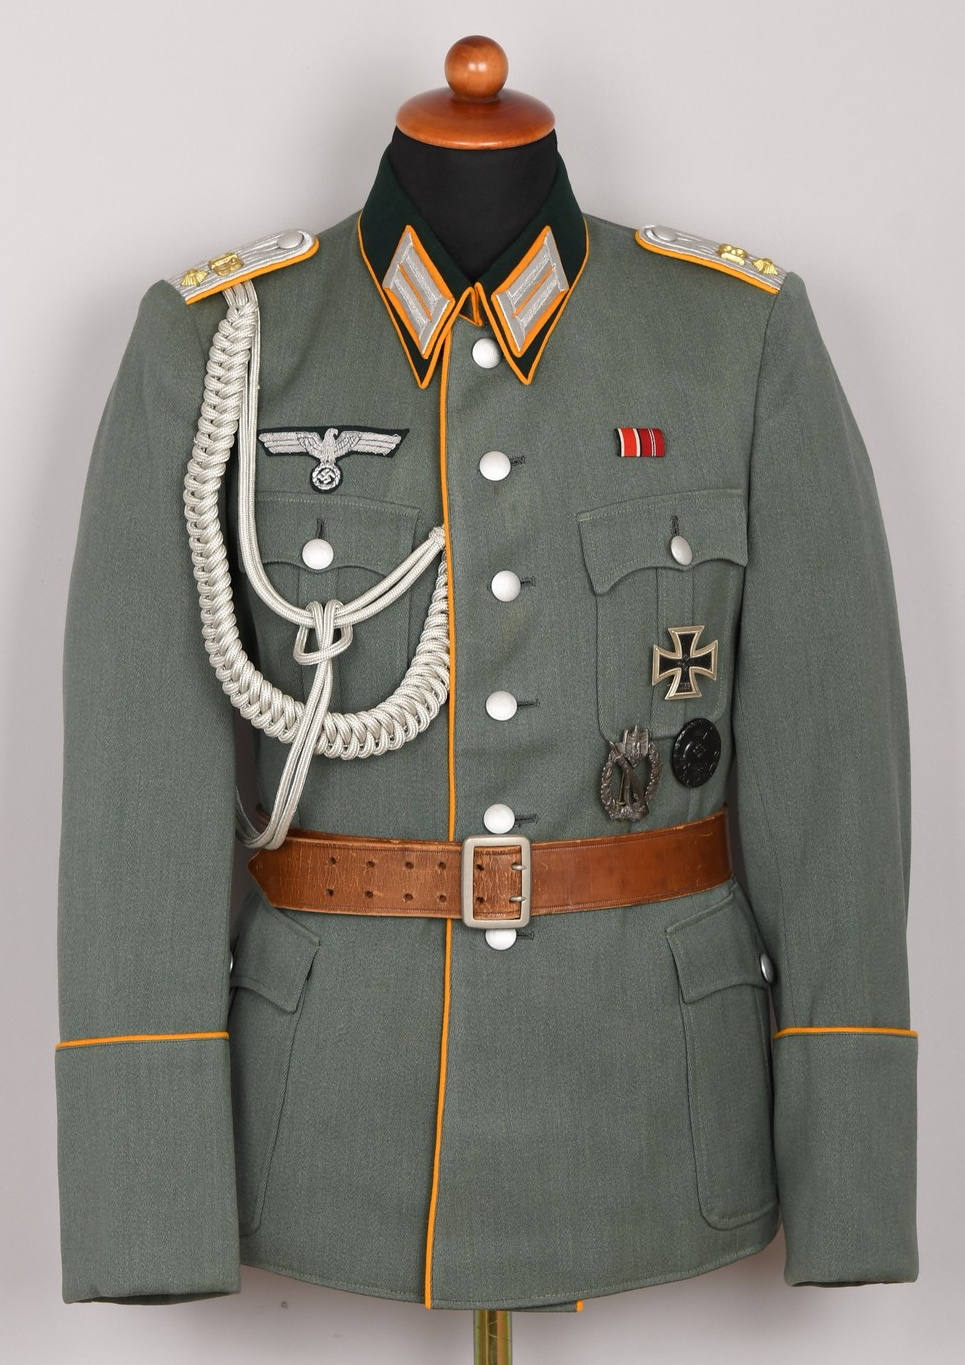 Cavallery Rgt 13 Oberleutnants Piped Service Tunic and Augilette